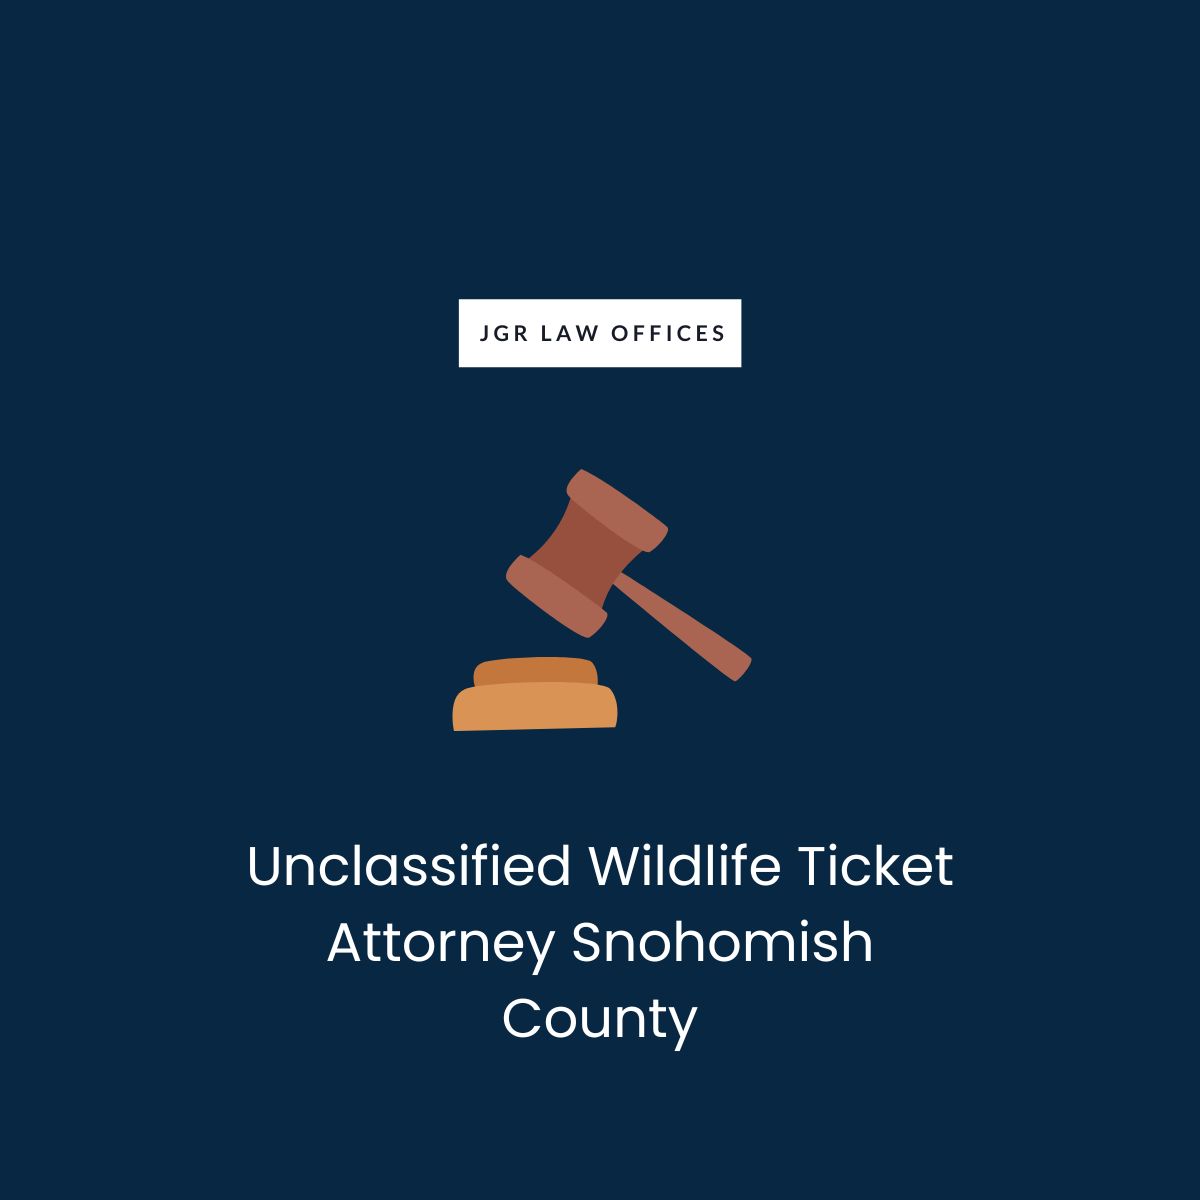 Unclassified Wildlife Ticket Attorney Snohomish County